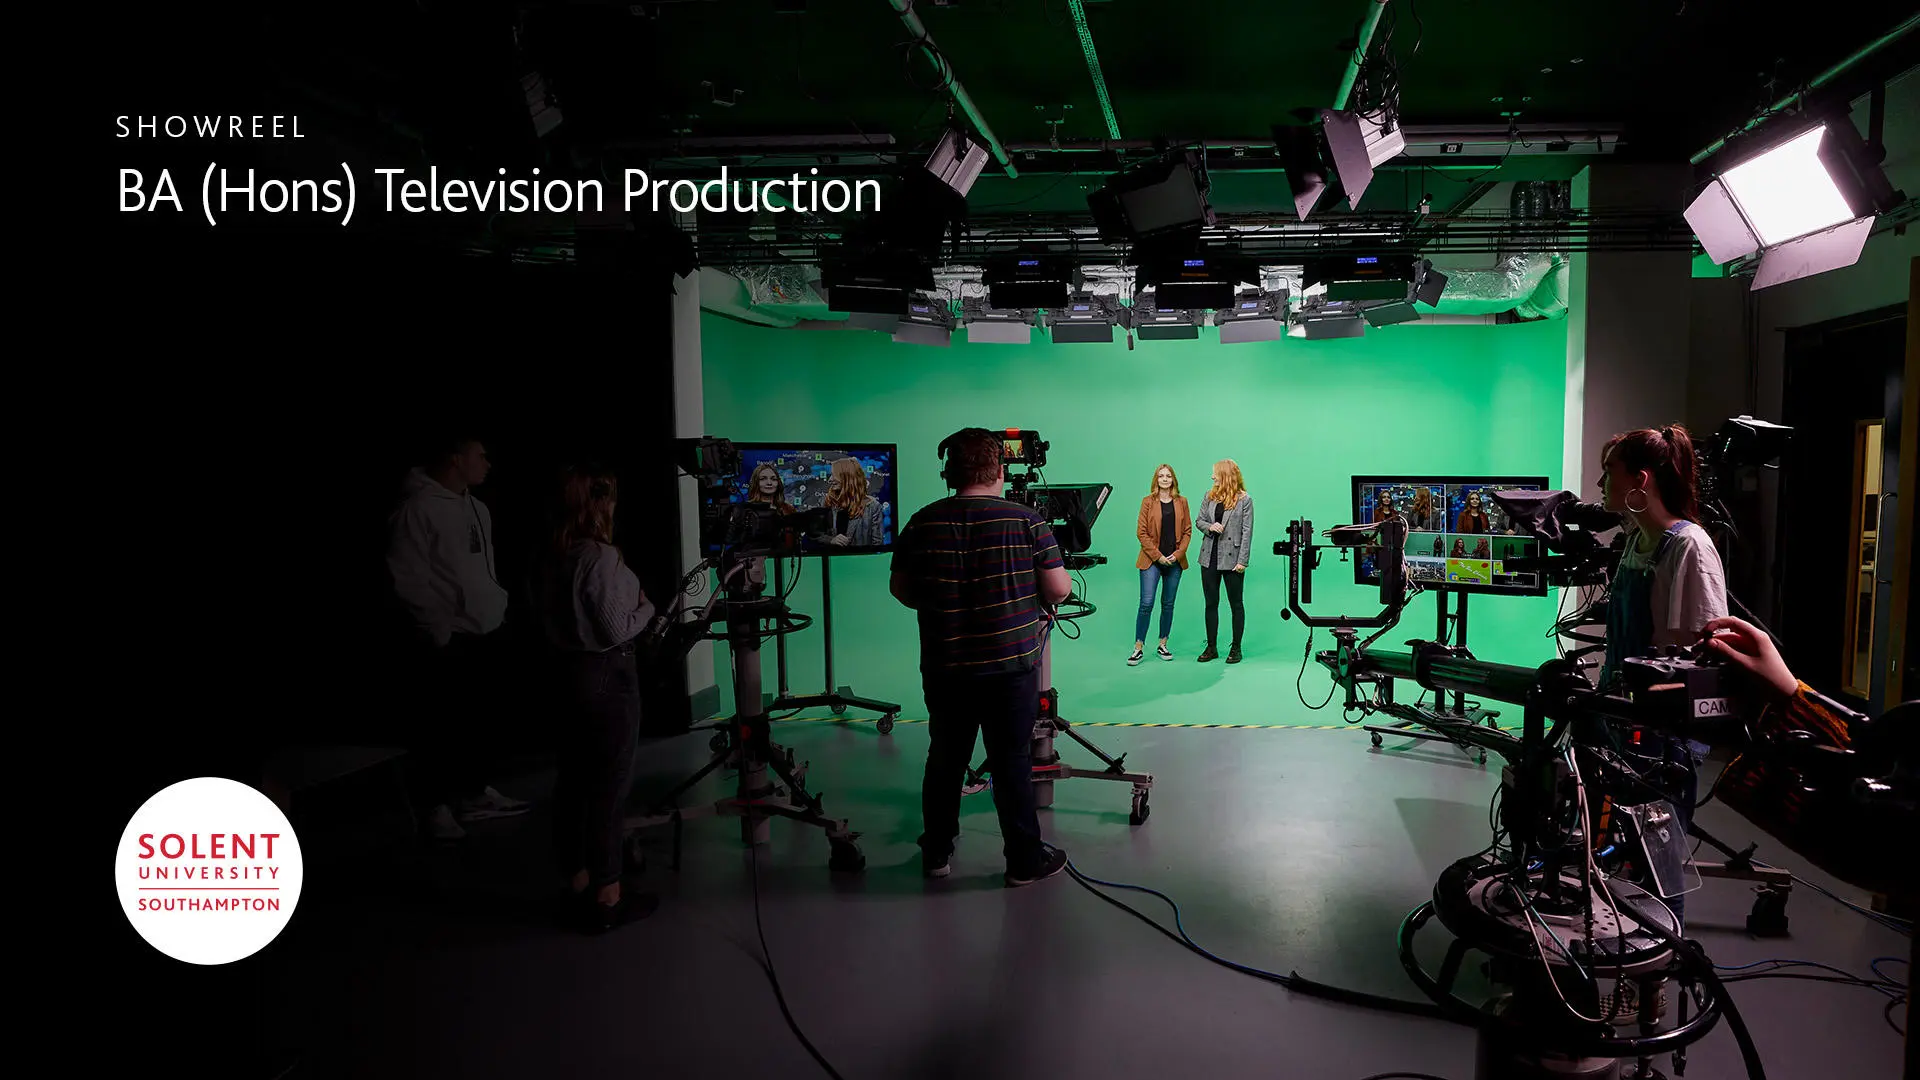 Image reads 'Showreel BA (Hons) Television Production' 